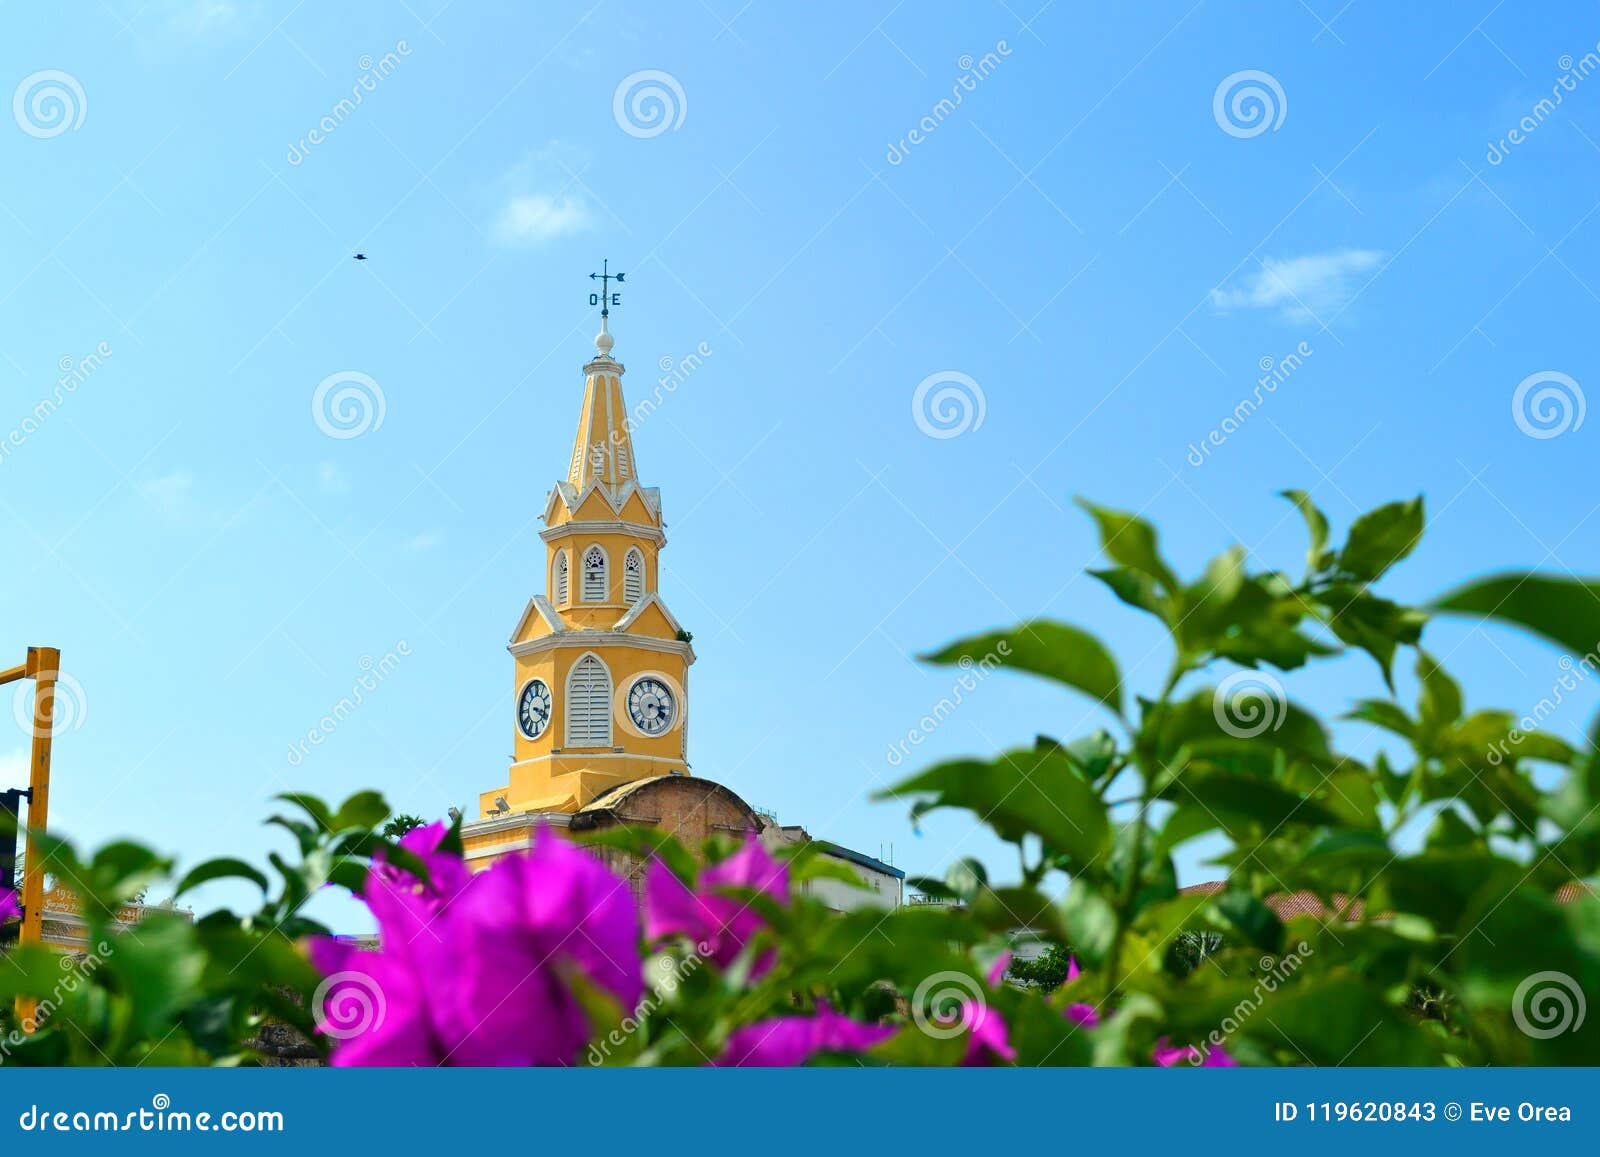 clock tower in colonial city cartagena in colombia